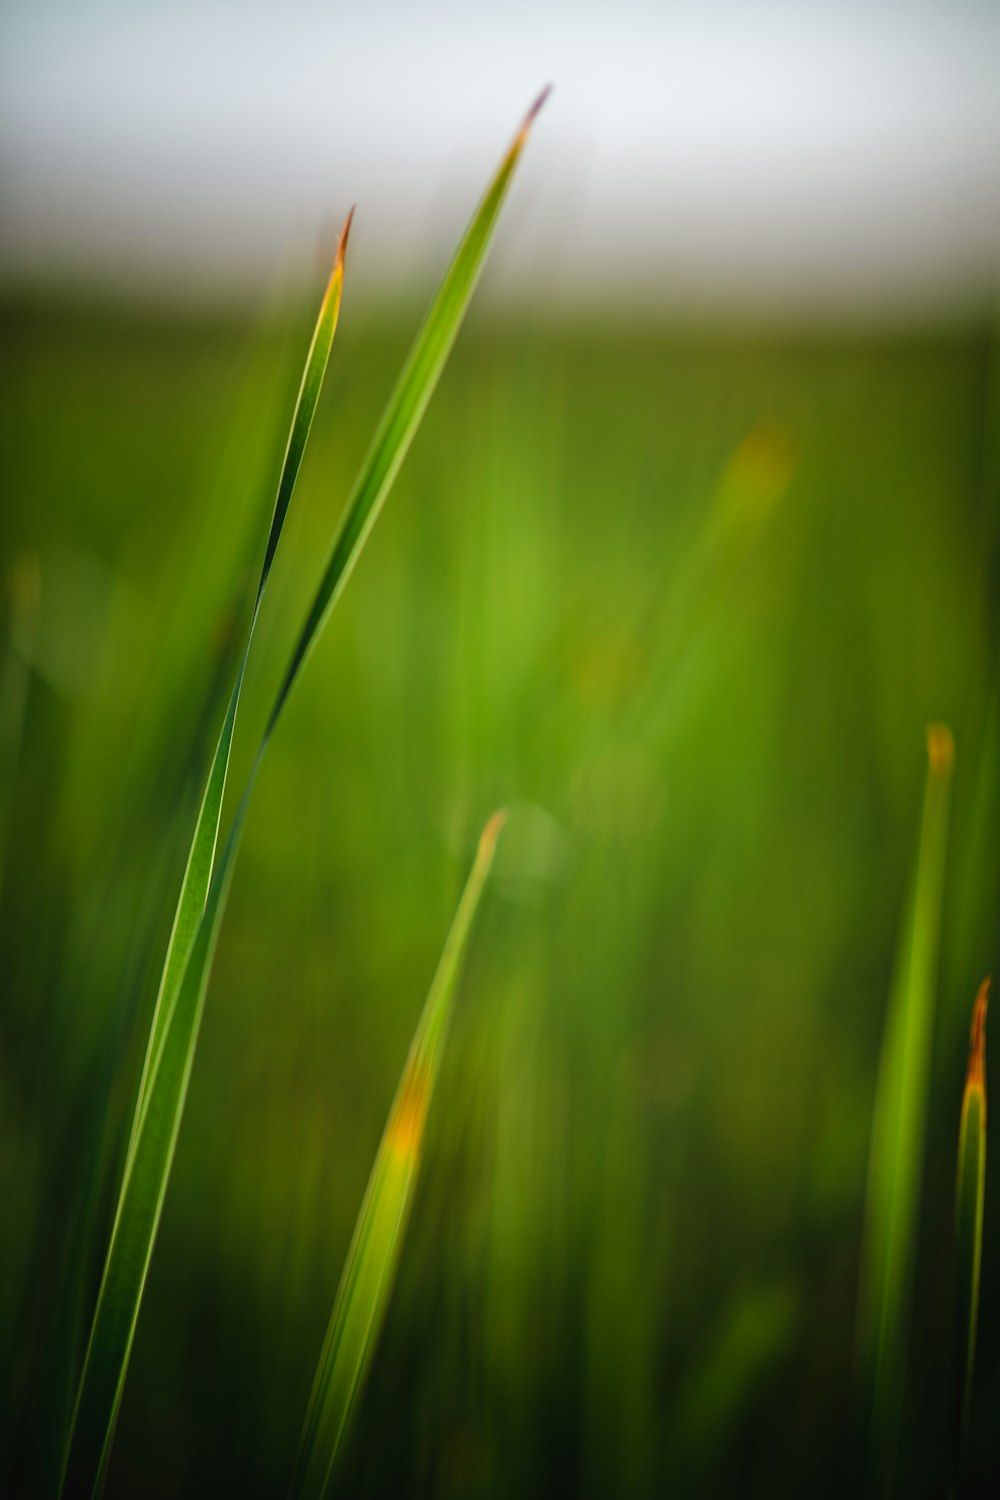 a blurry photo of some green grass